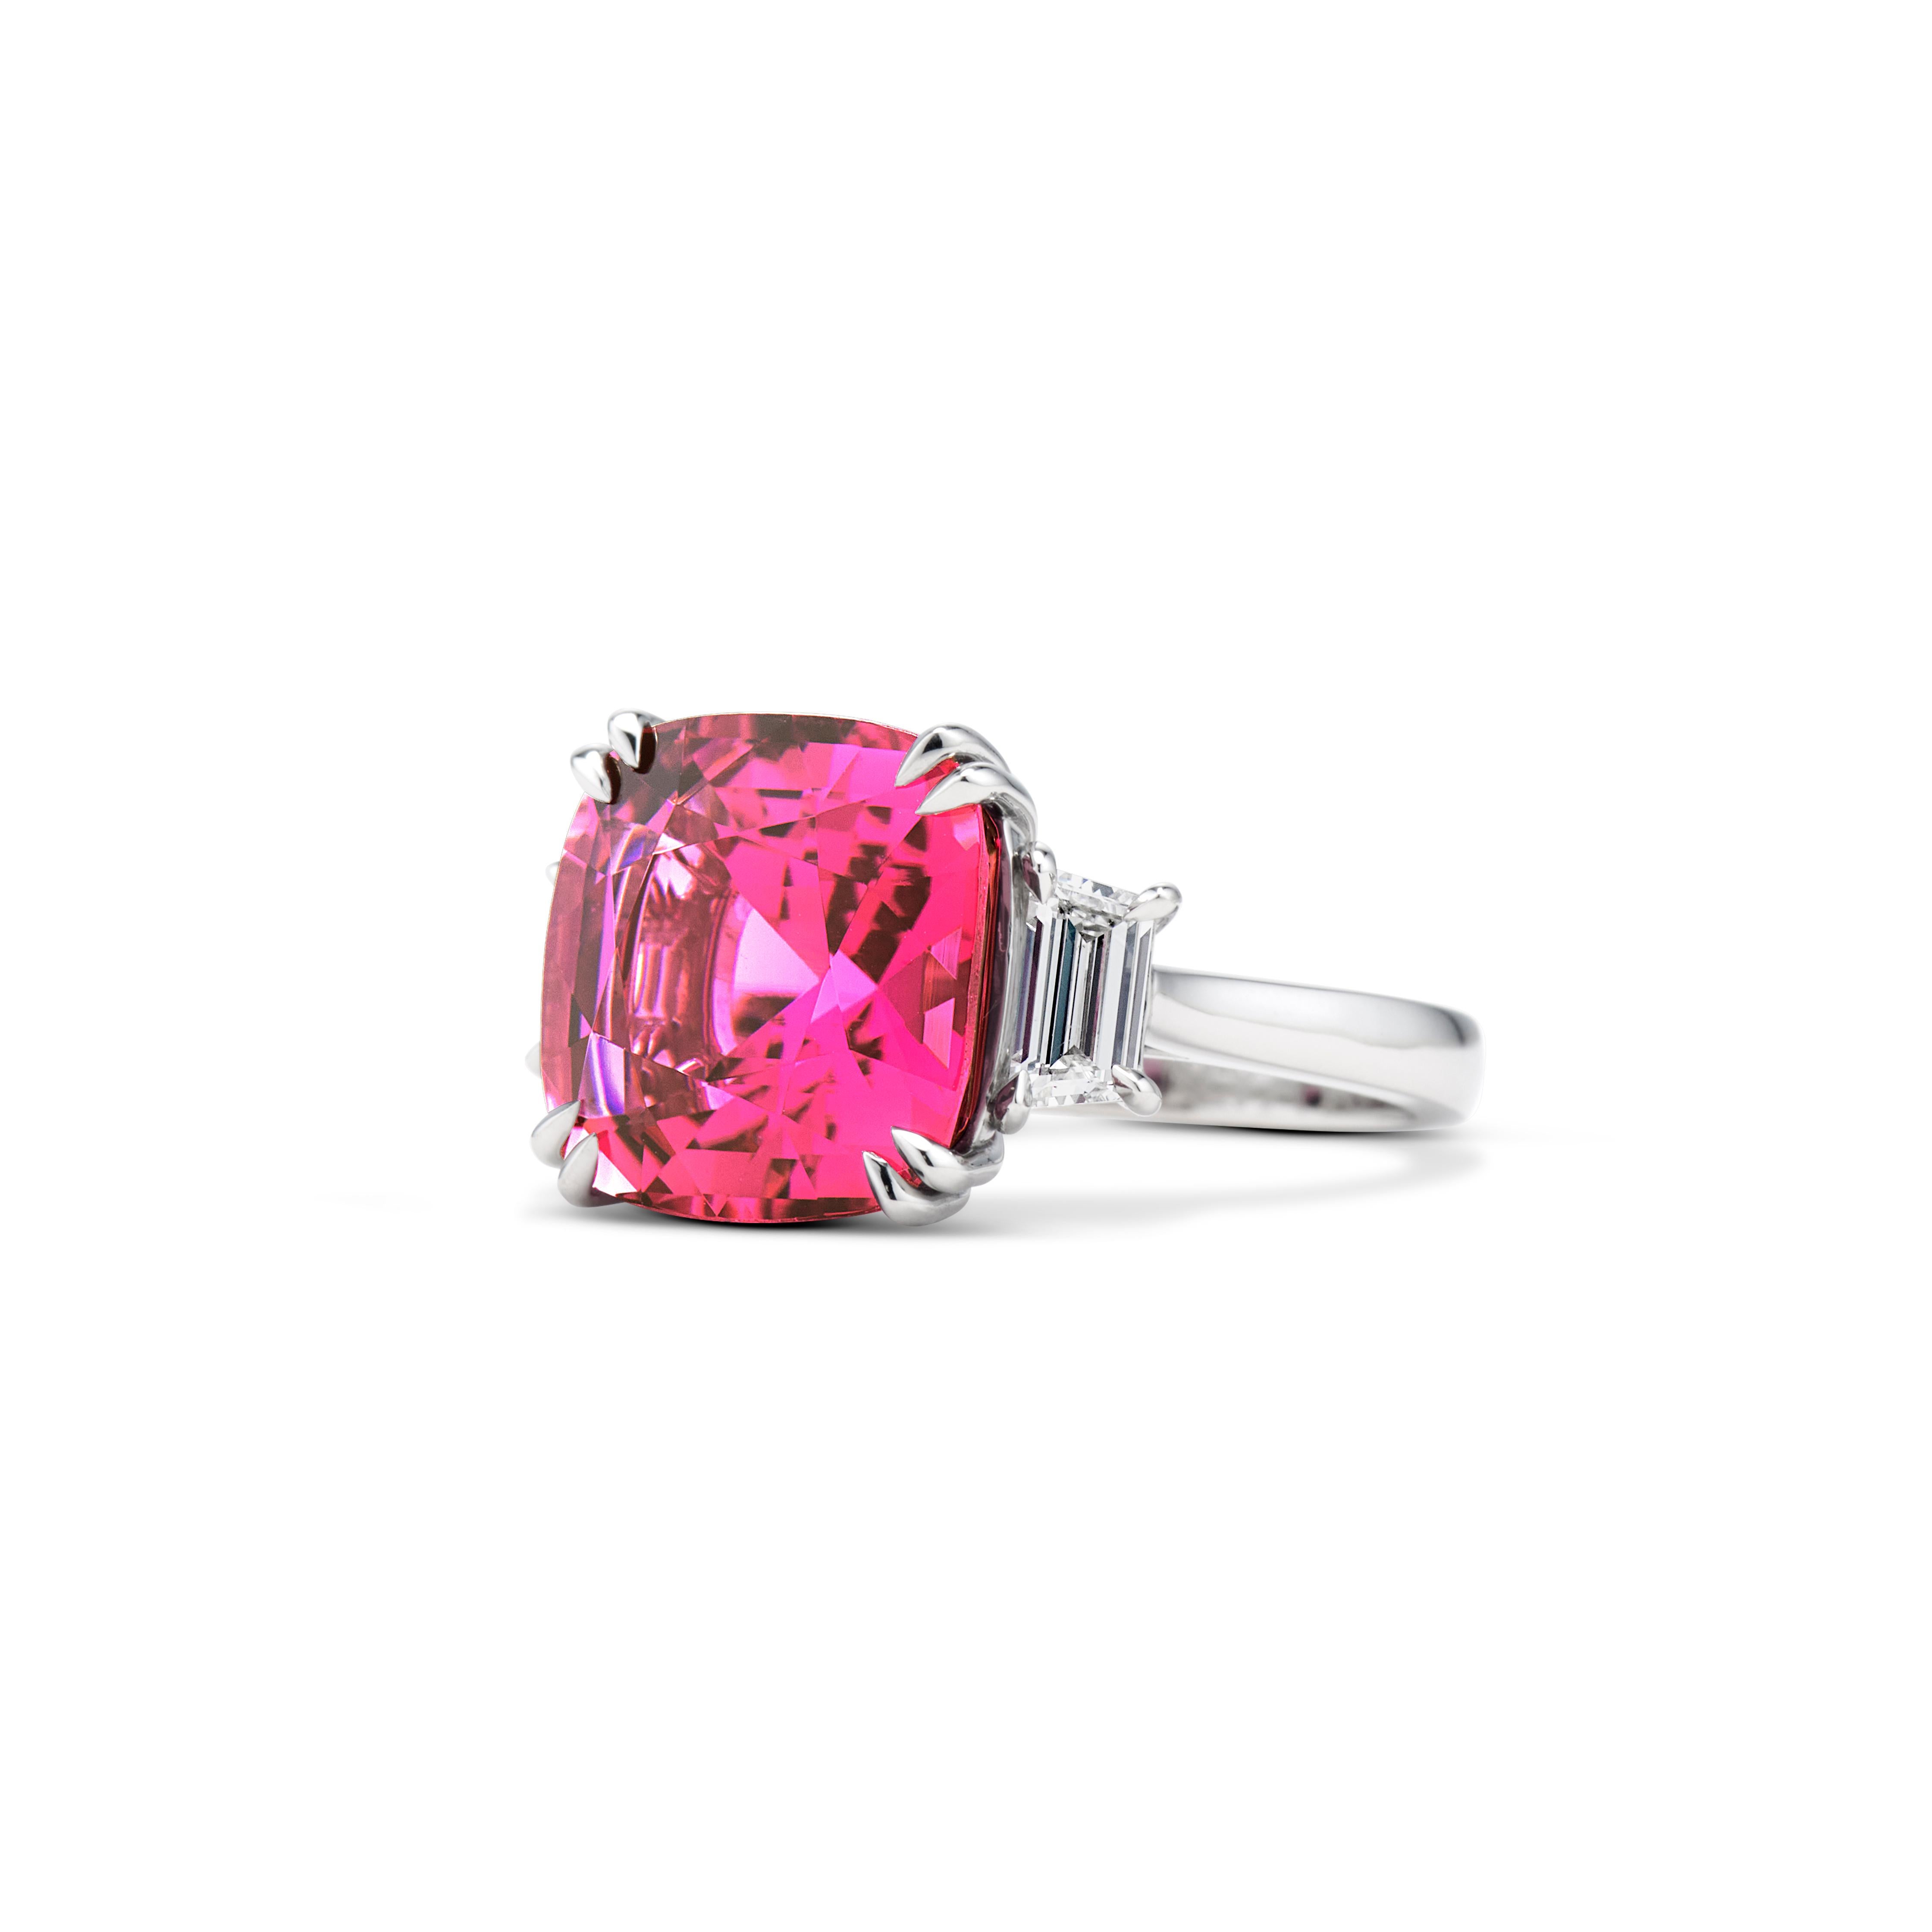 From the Passion & Strength collection.
The centerpiece of the ring is a 7.7-carat pink tourmaline with colorless trapeze-cut side stones. 
Total diamond weight 0.58 carats.
The ring is handcrafted in platinum.
Ring size: 6; resizable upon request.
